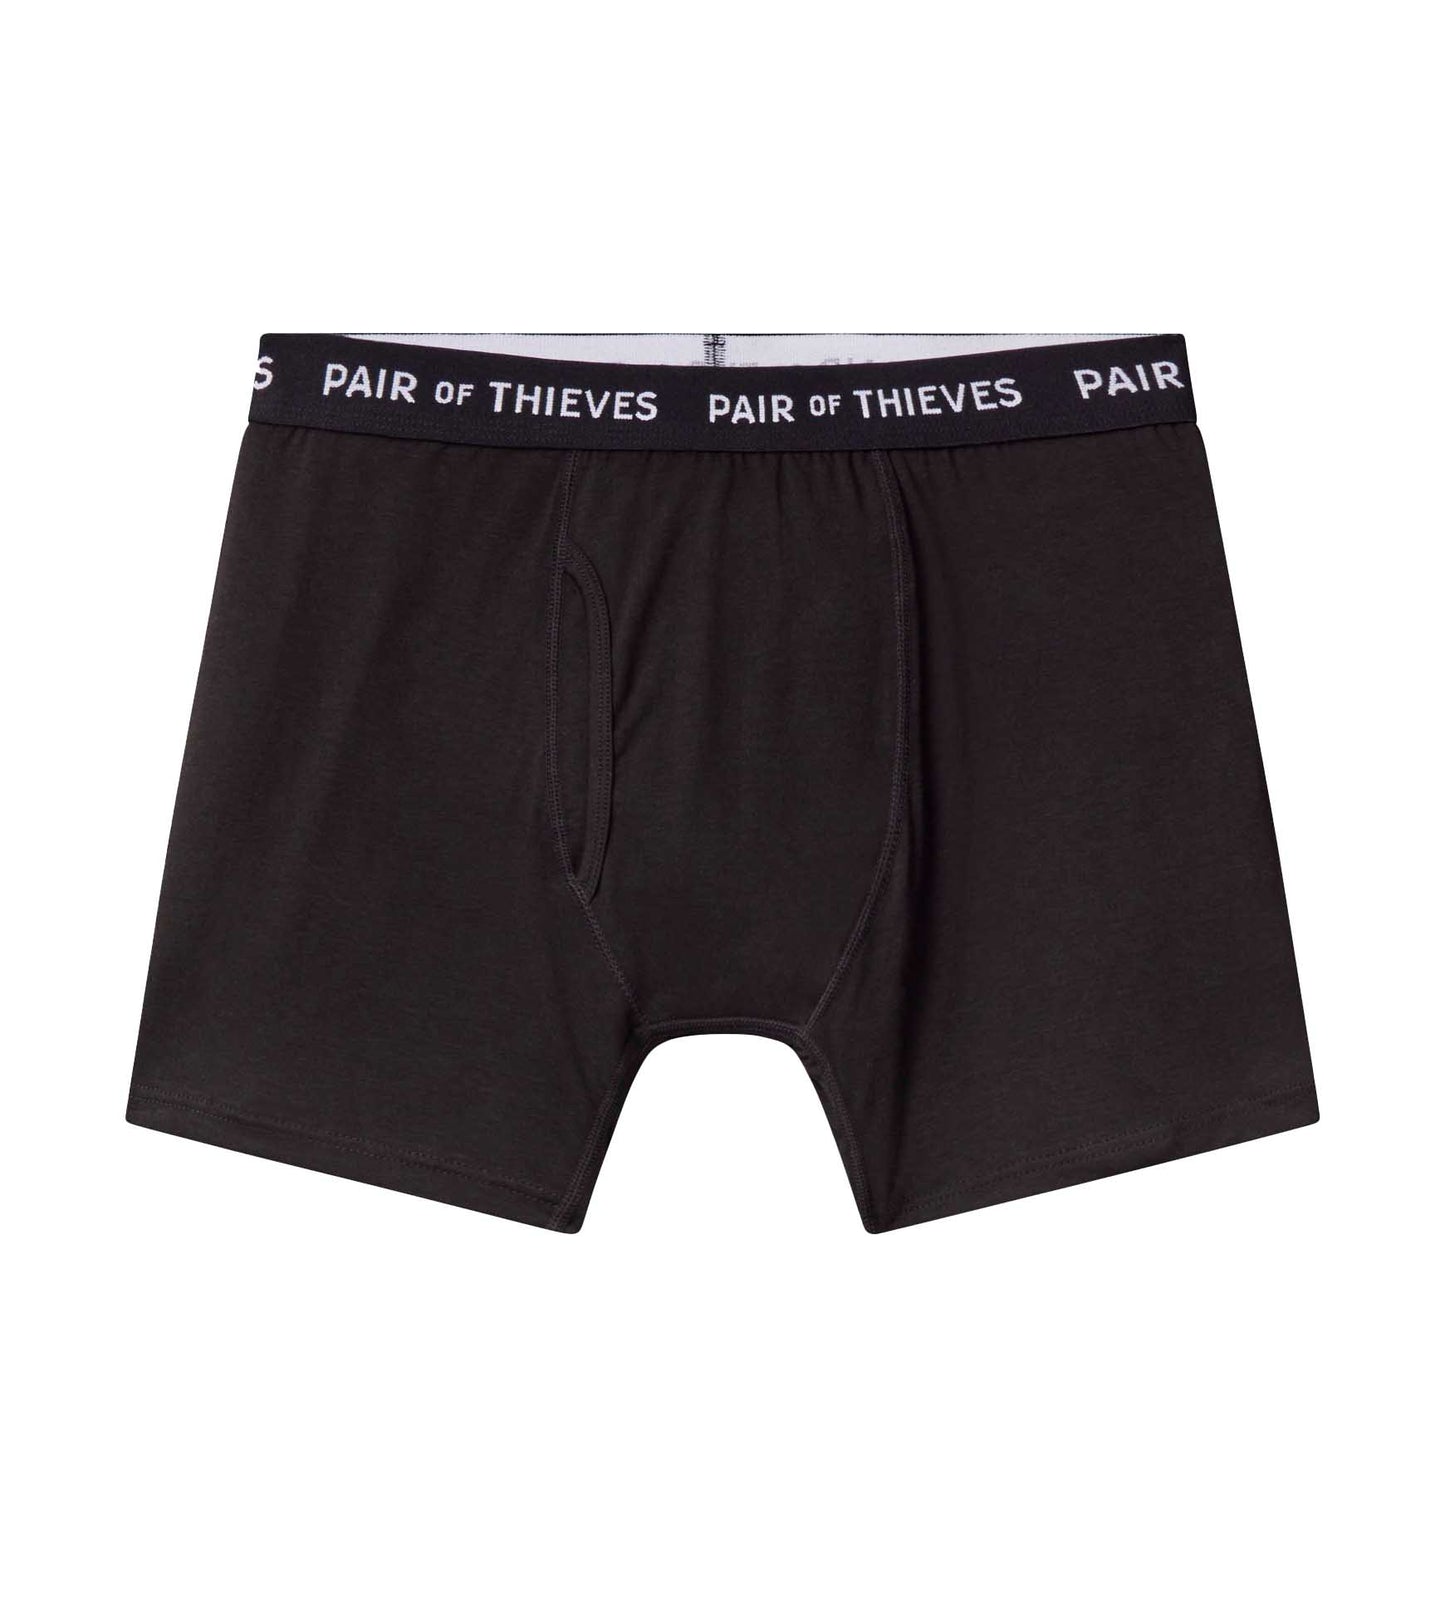 Pair of Thieves Men's 4 Pack Everyday Cotton Boxer Briefs, Black